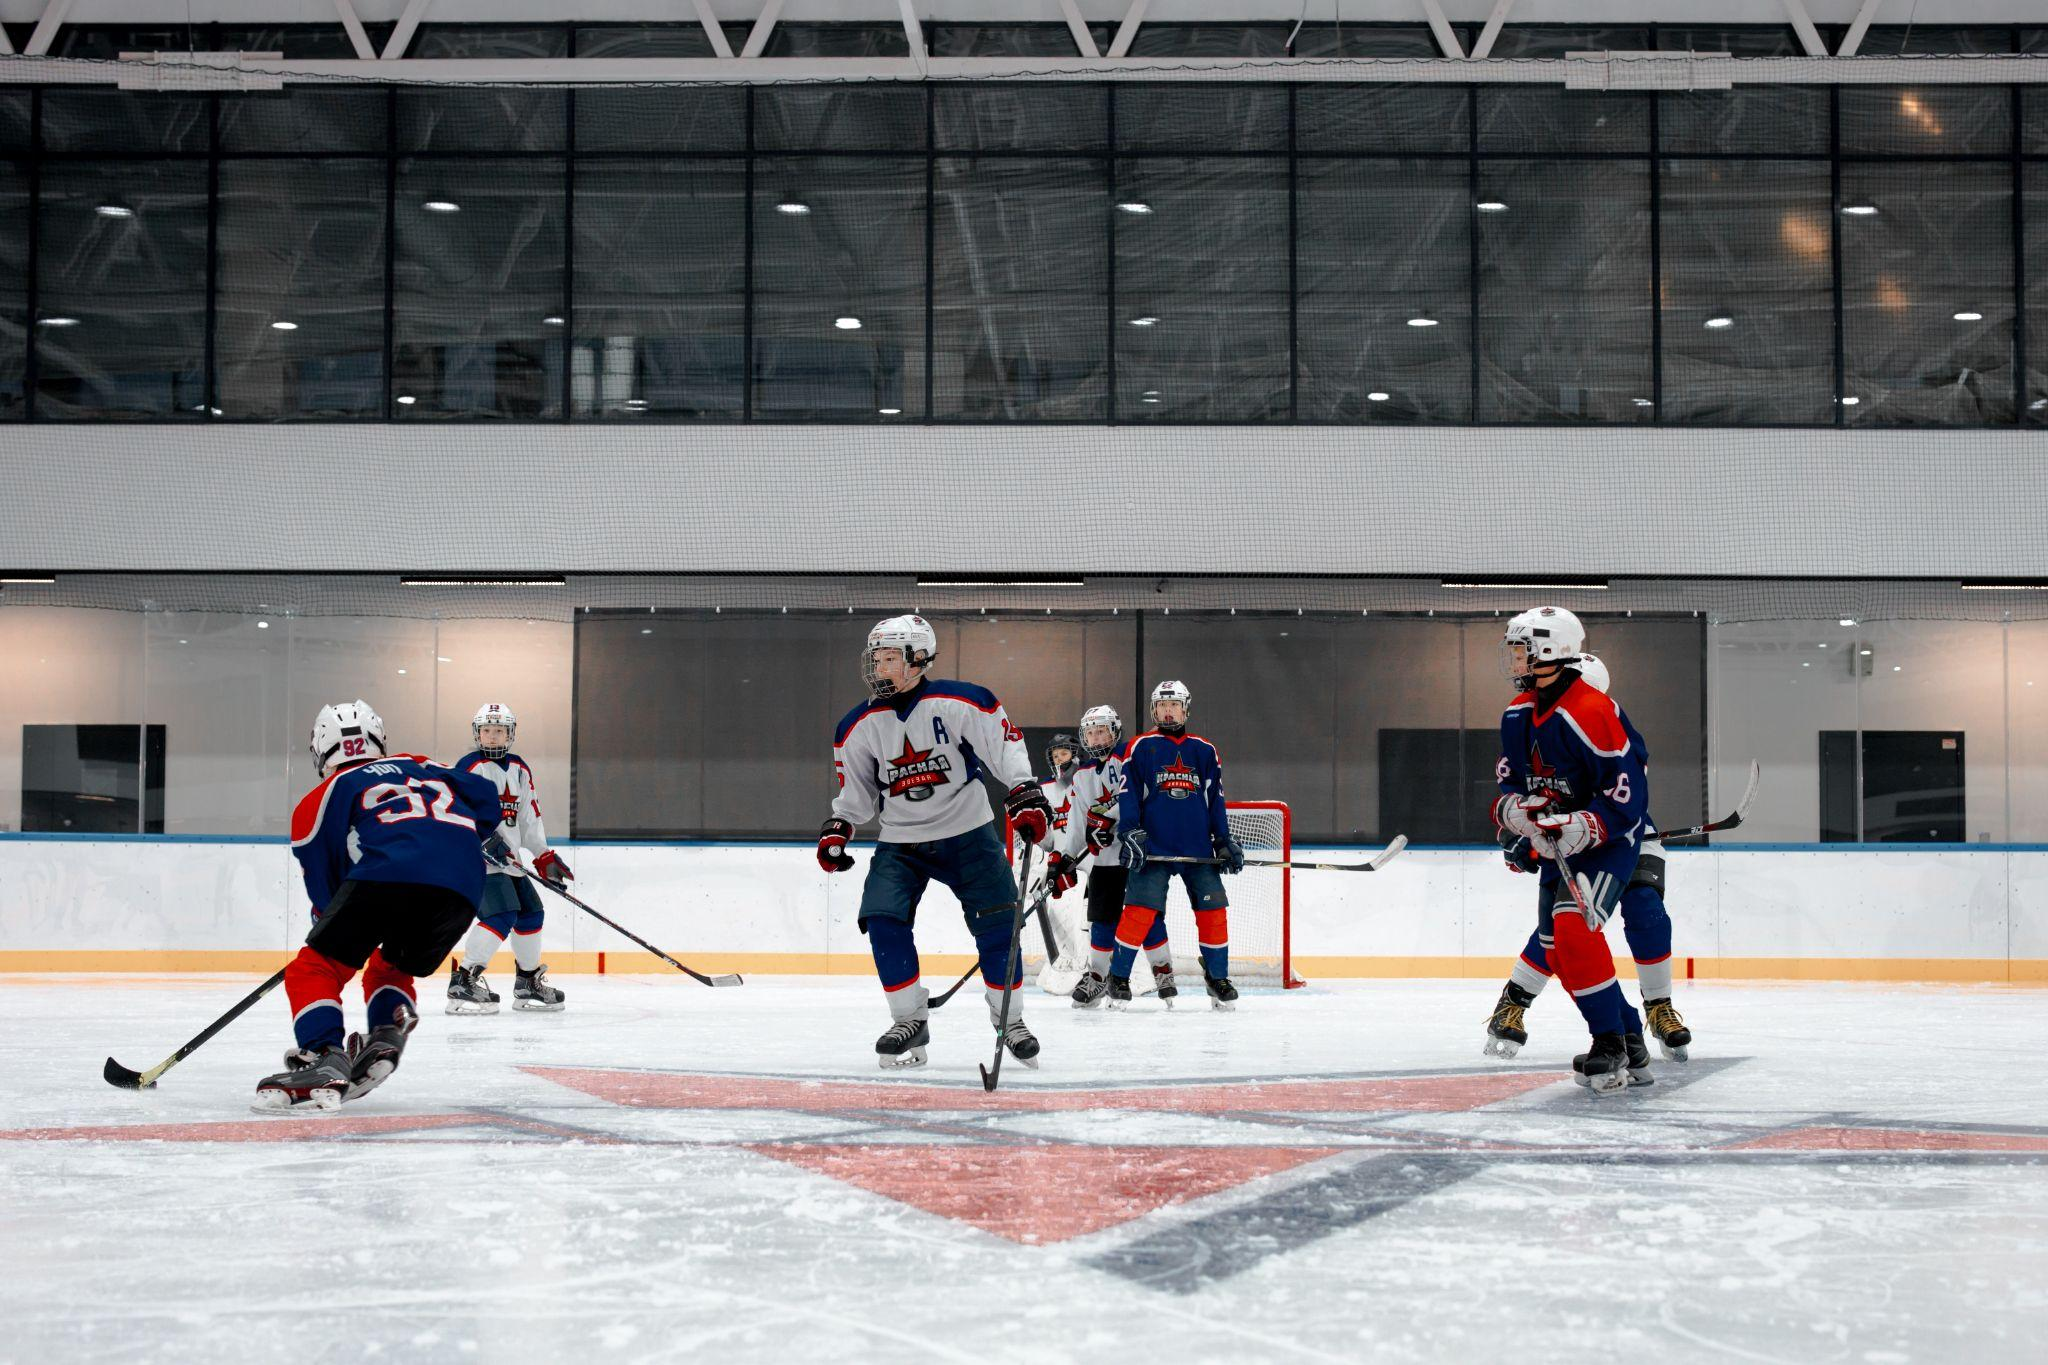 A game of ice hockey